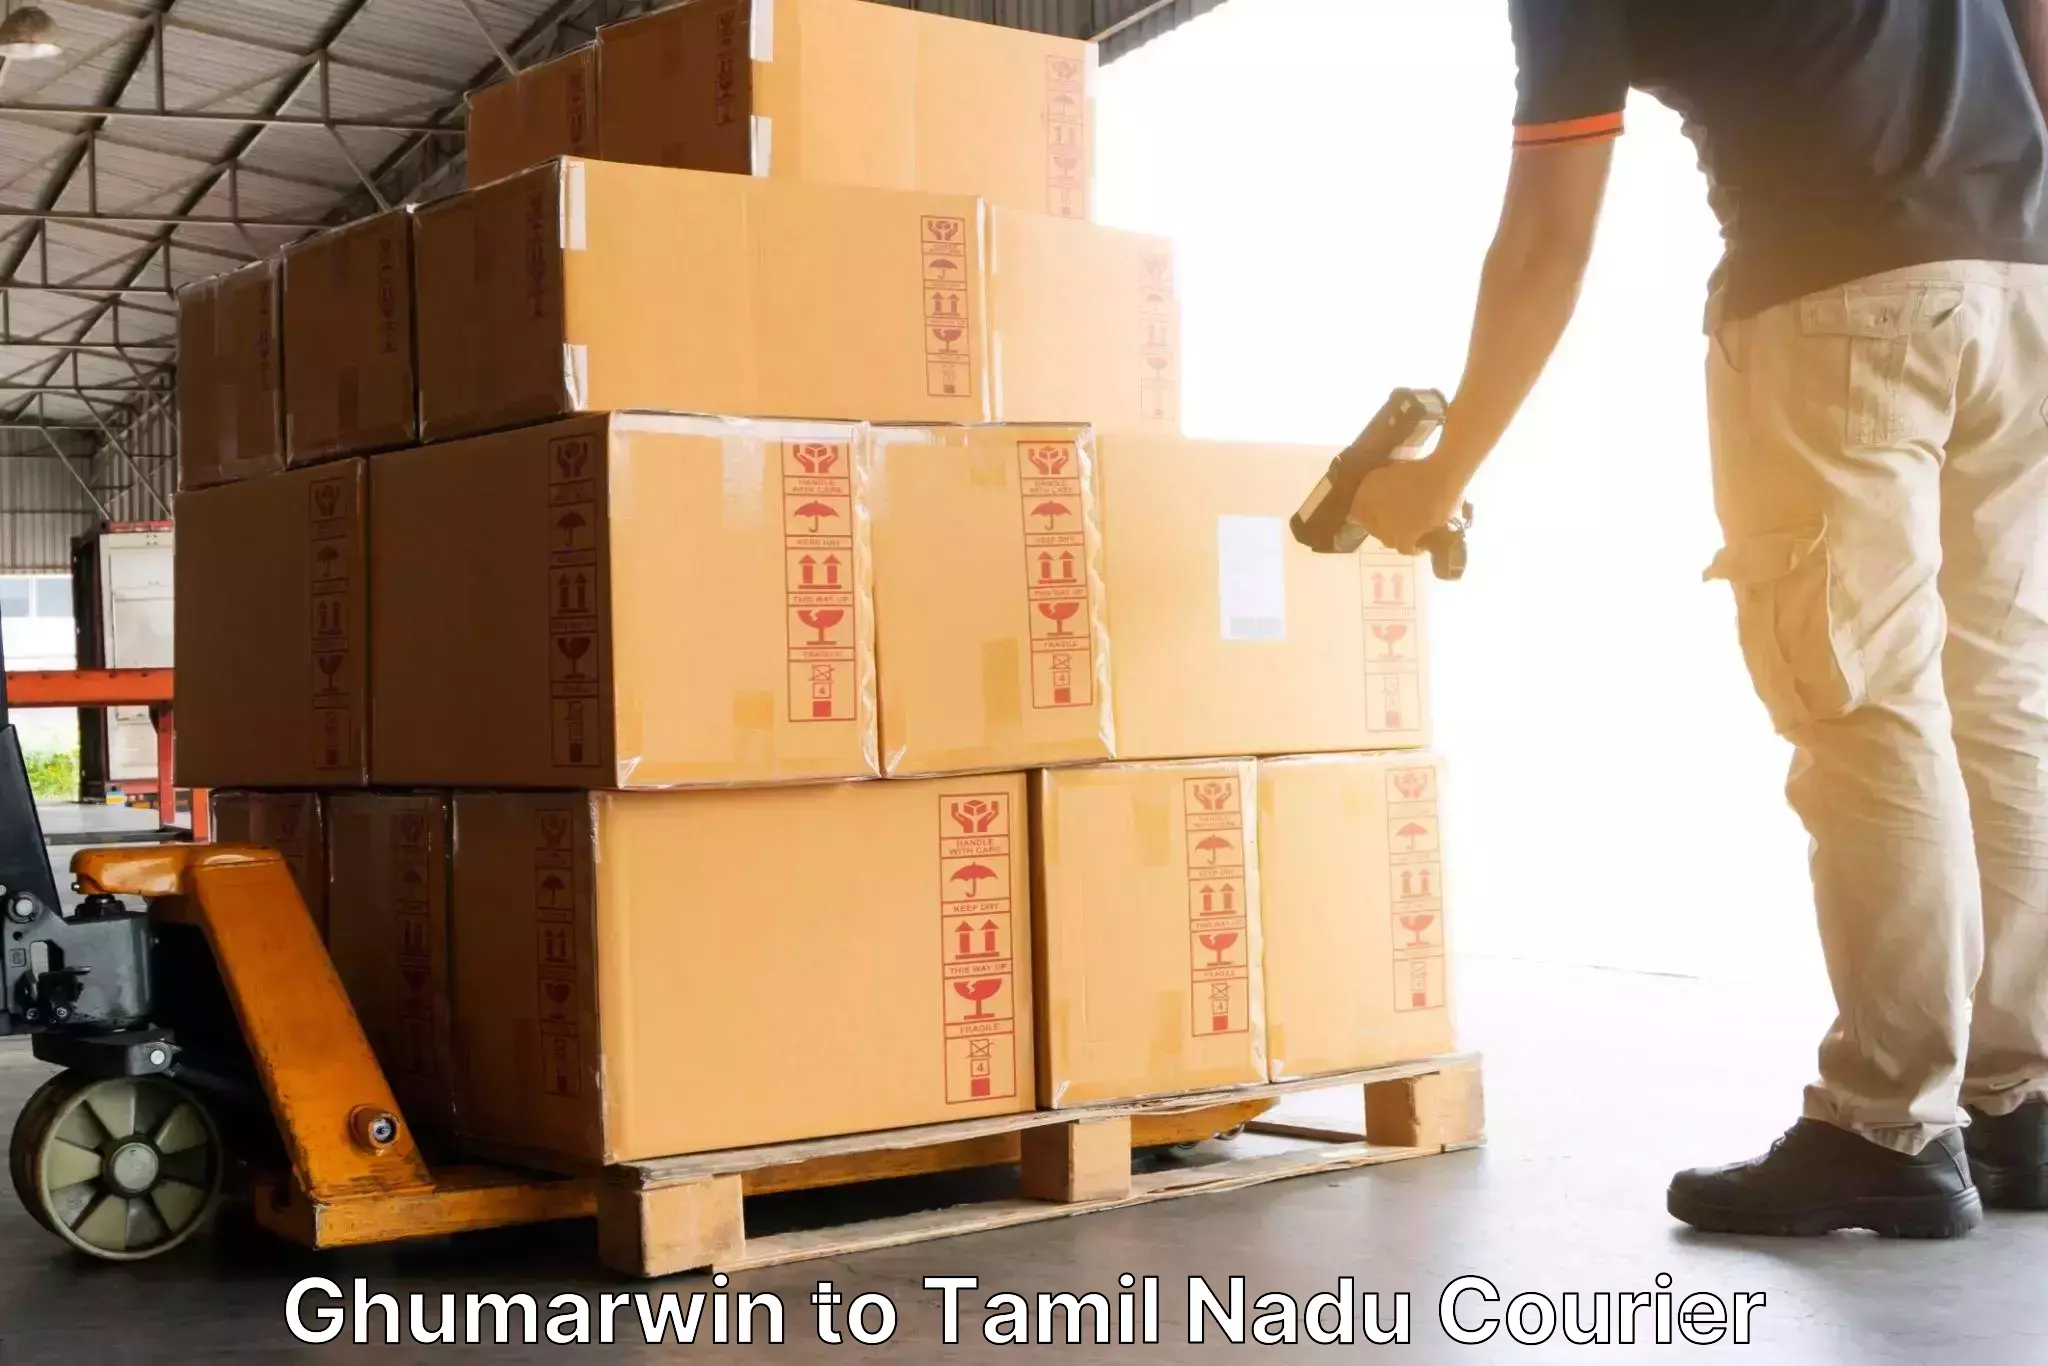 Courier service comparison Ghumarwin to Tamil Nadu